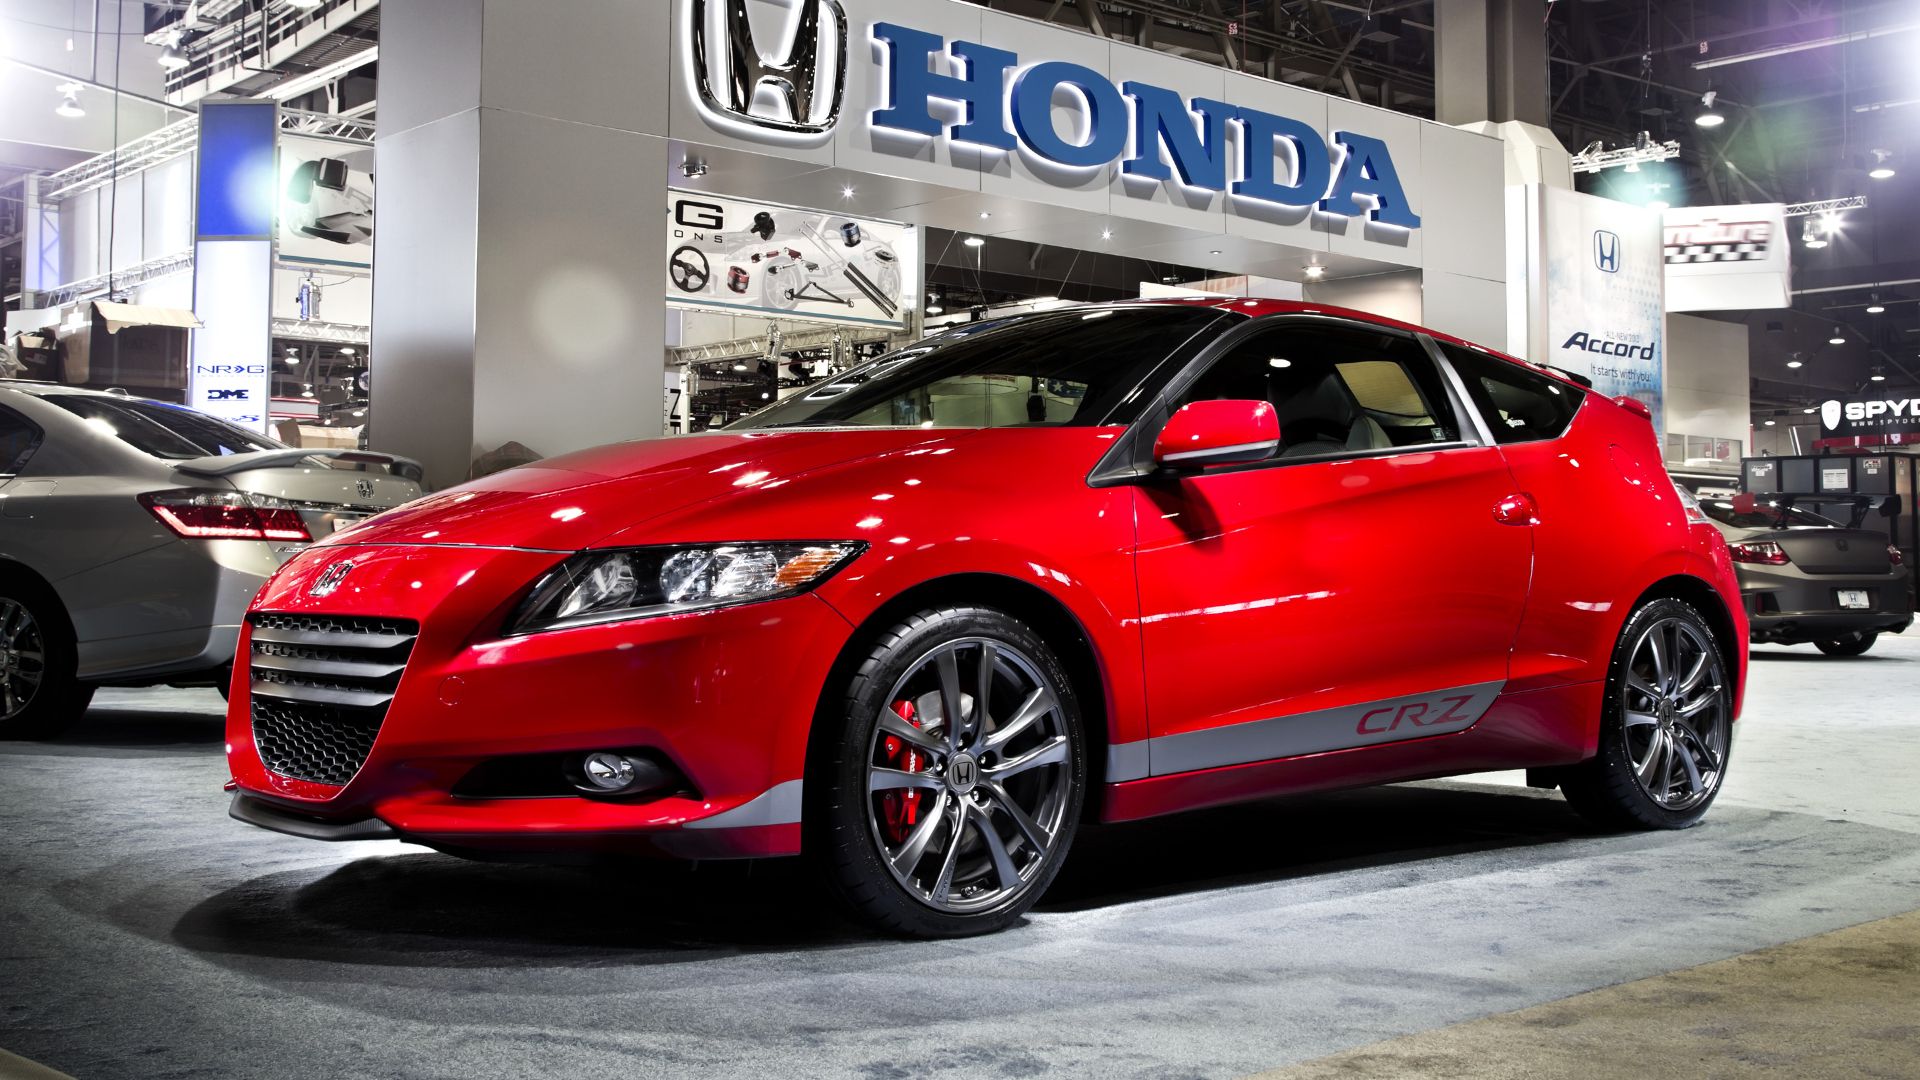 Static front three-quarters shot of a red 2015 HPD Honda CR-Z on display.